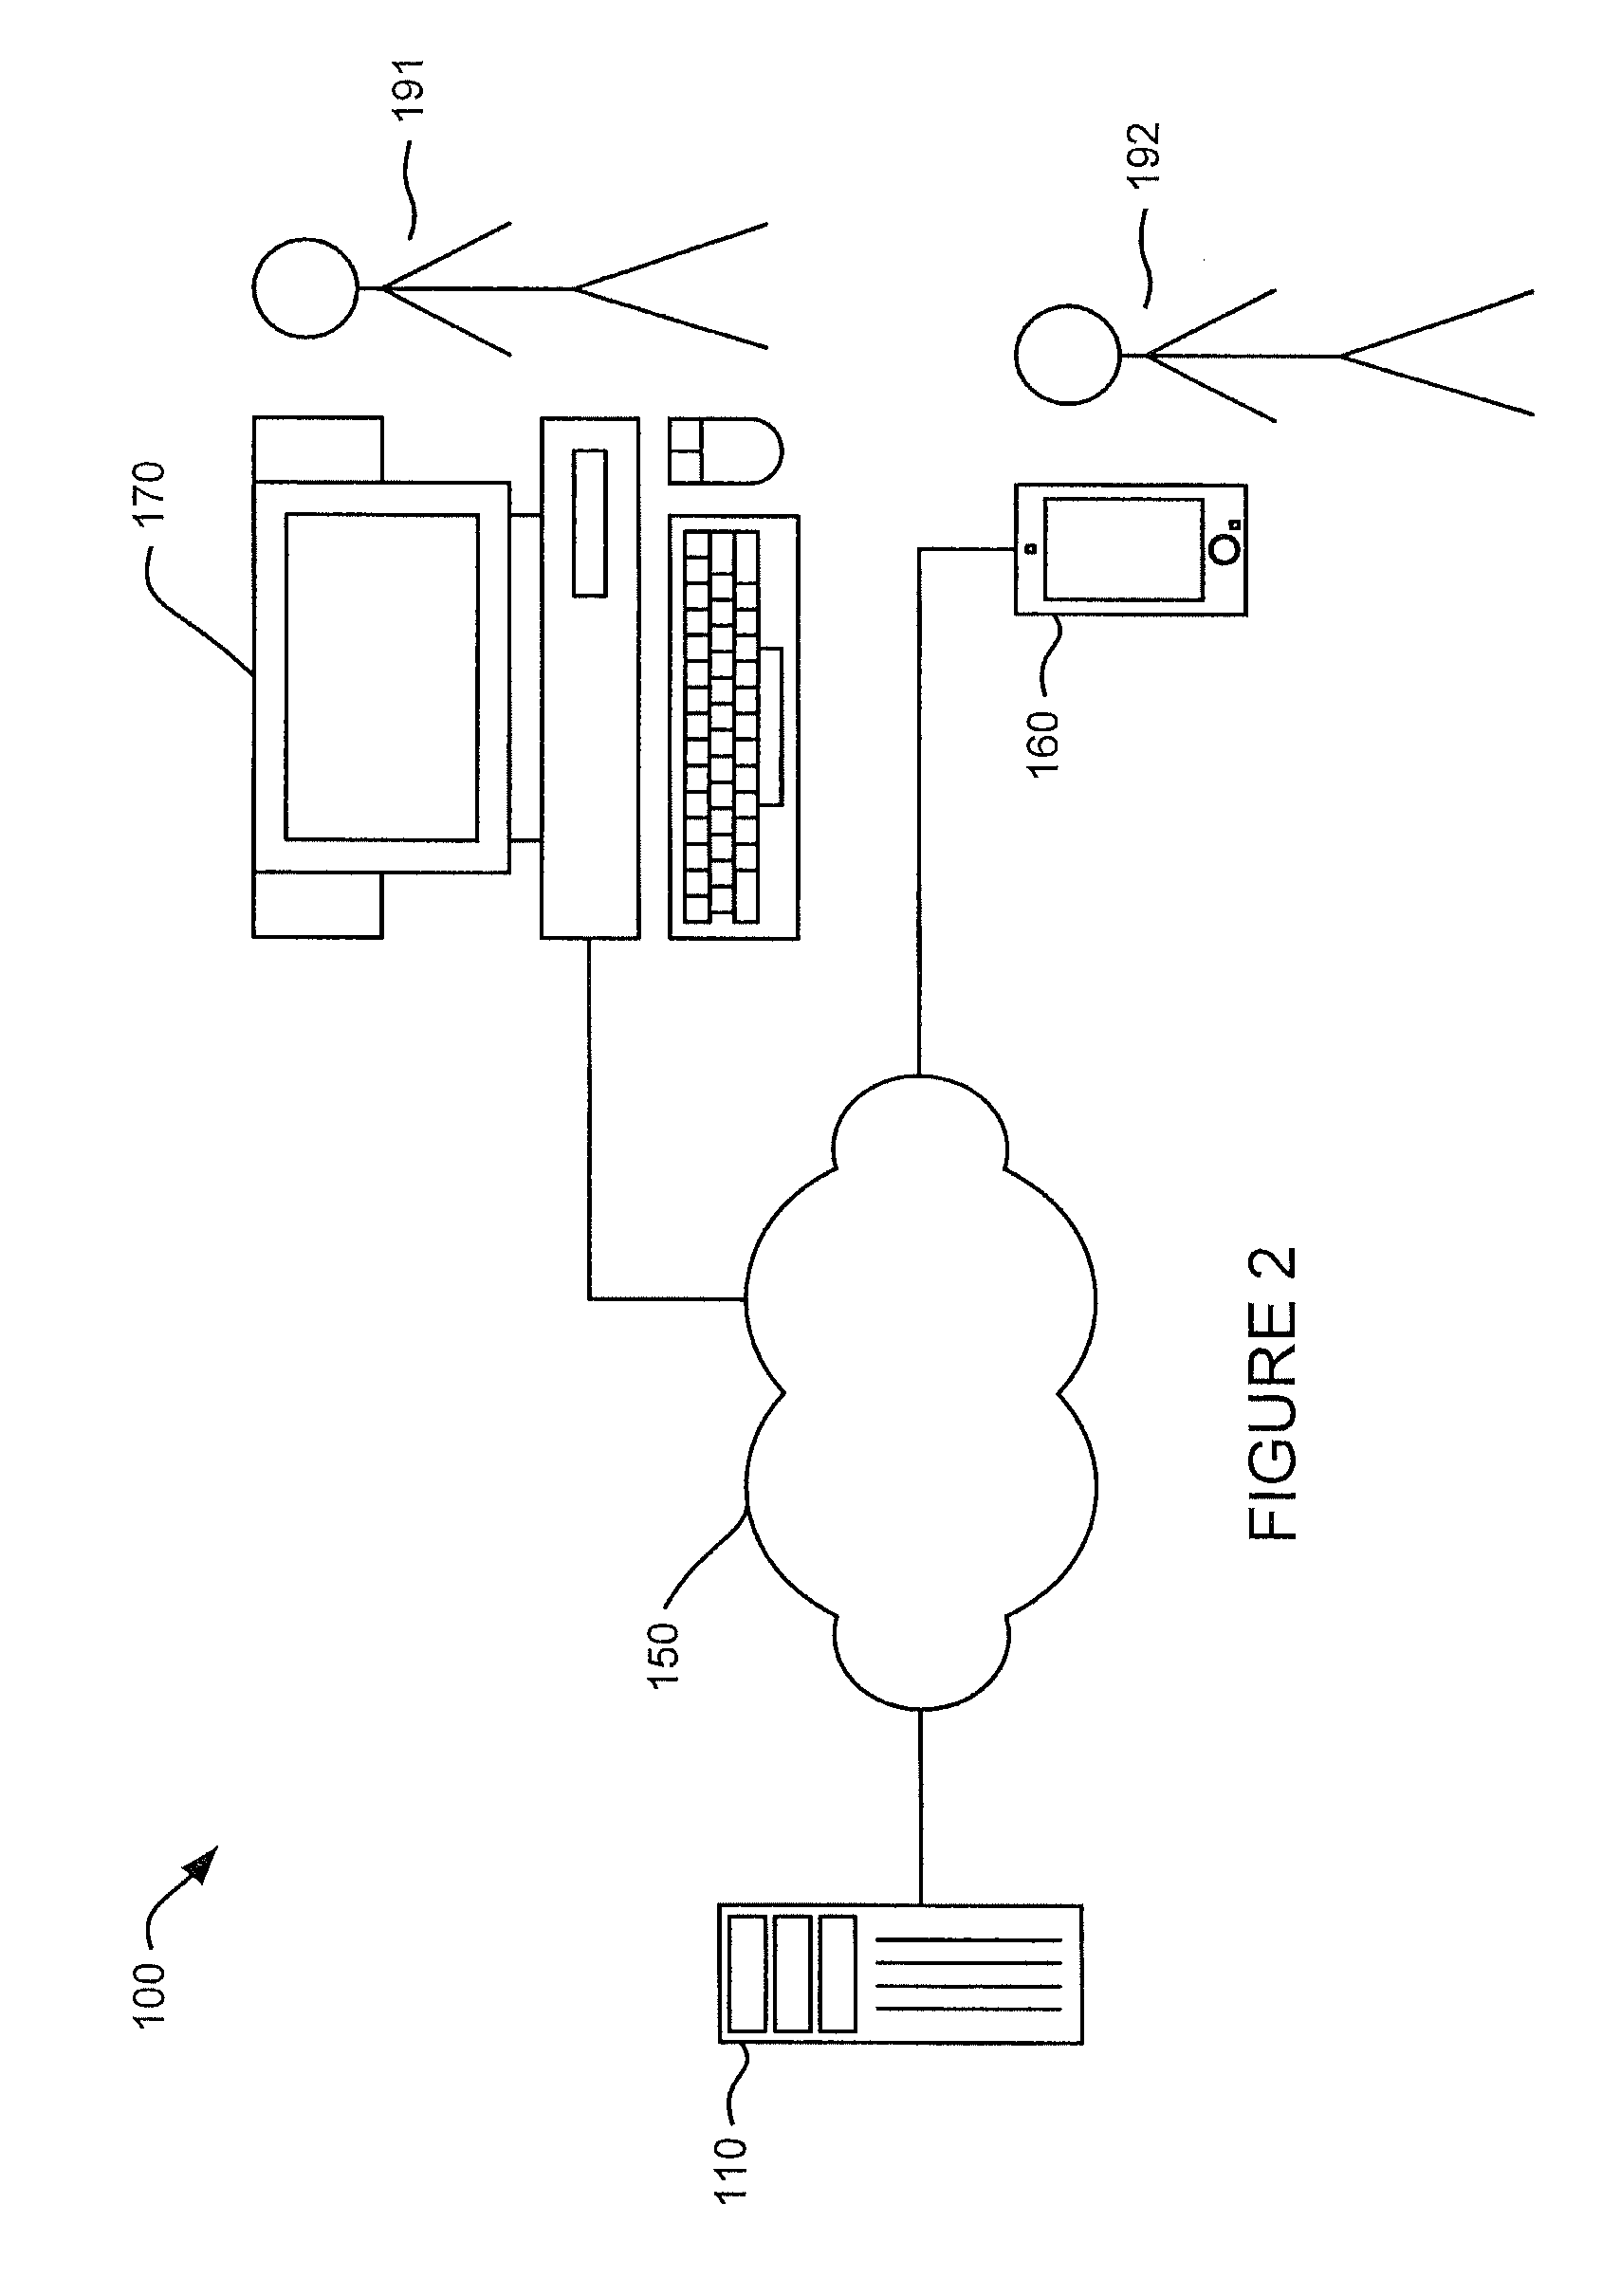 System and method of using automatically-identified prominent establishments in driving directions